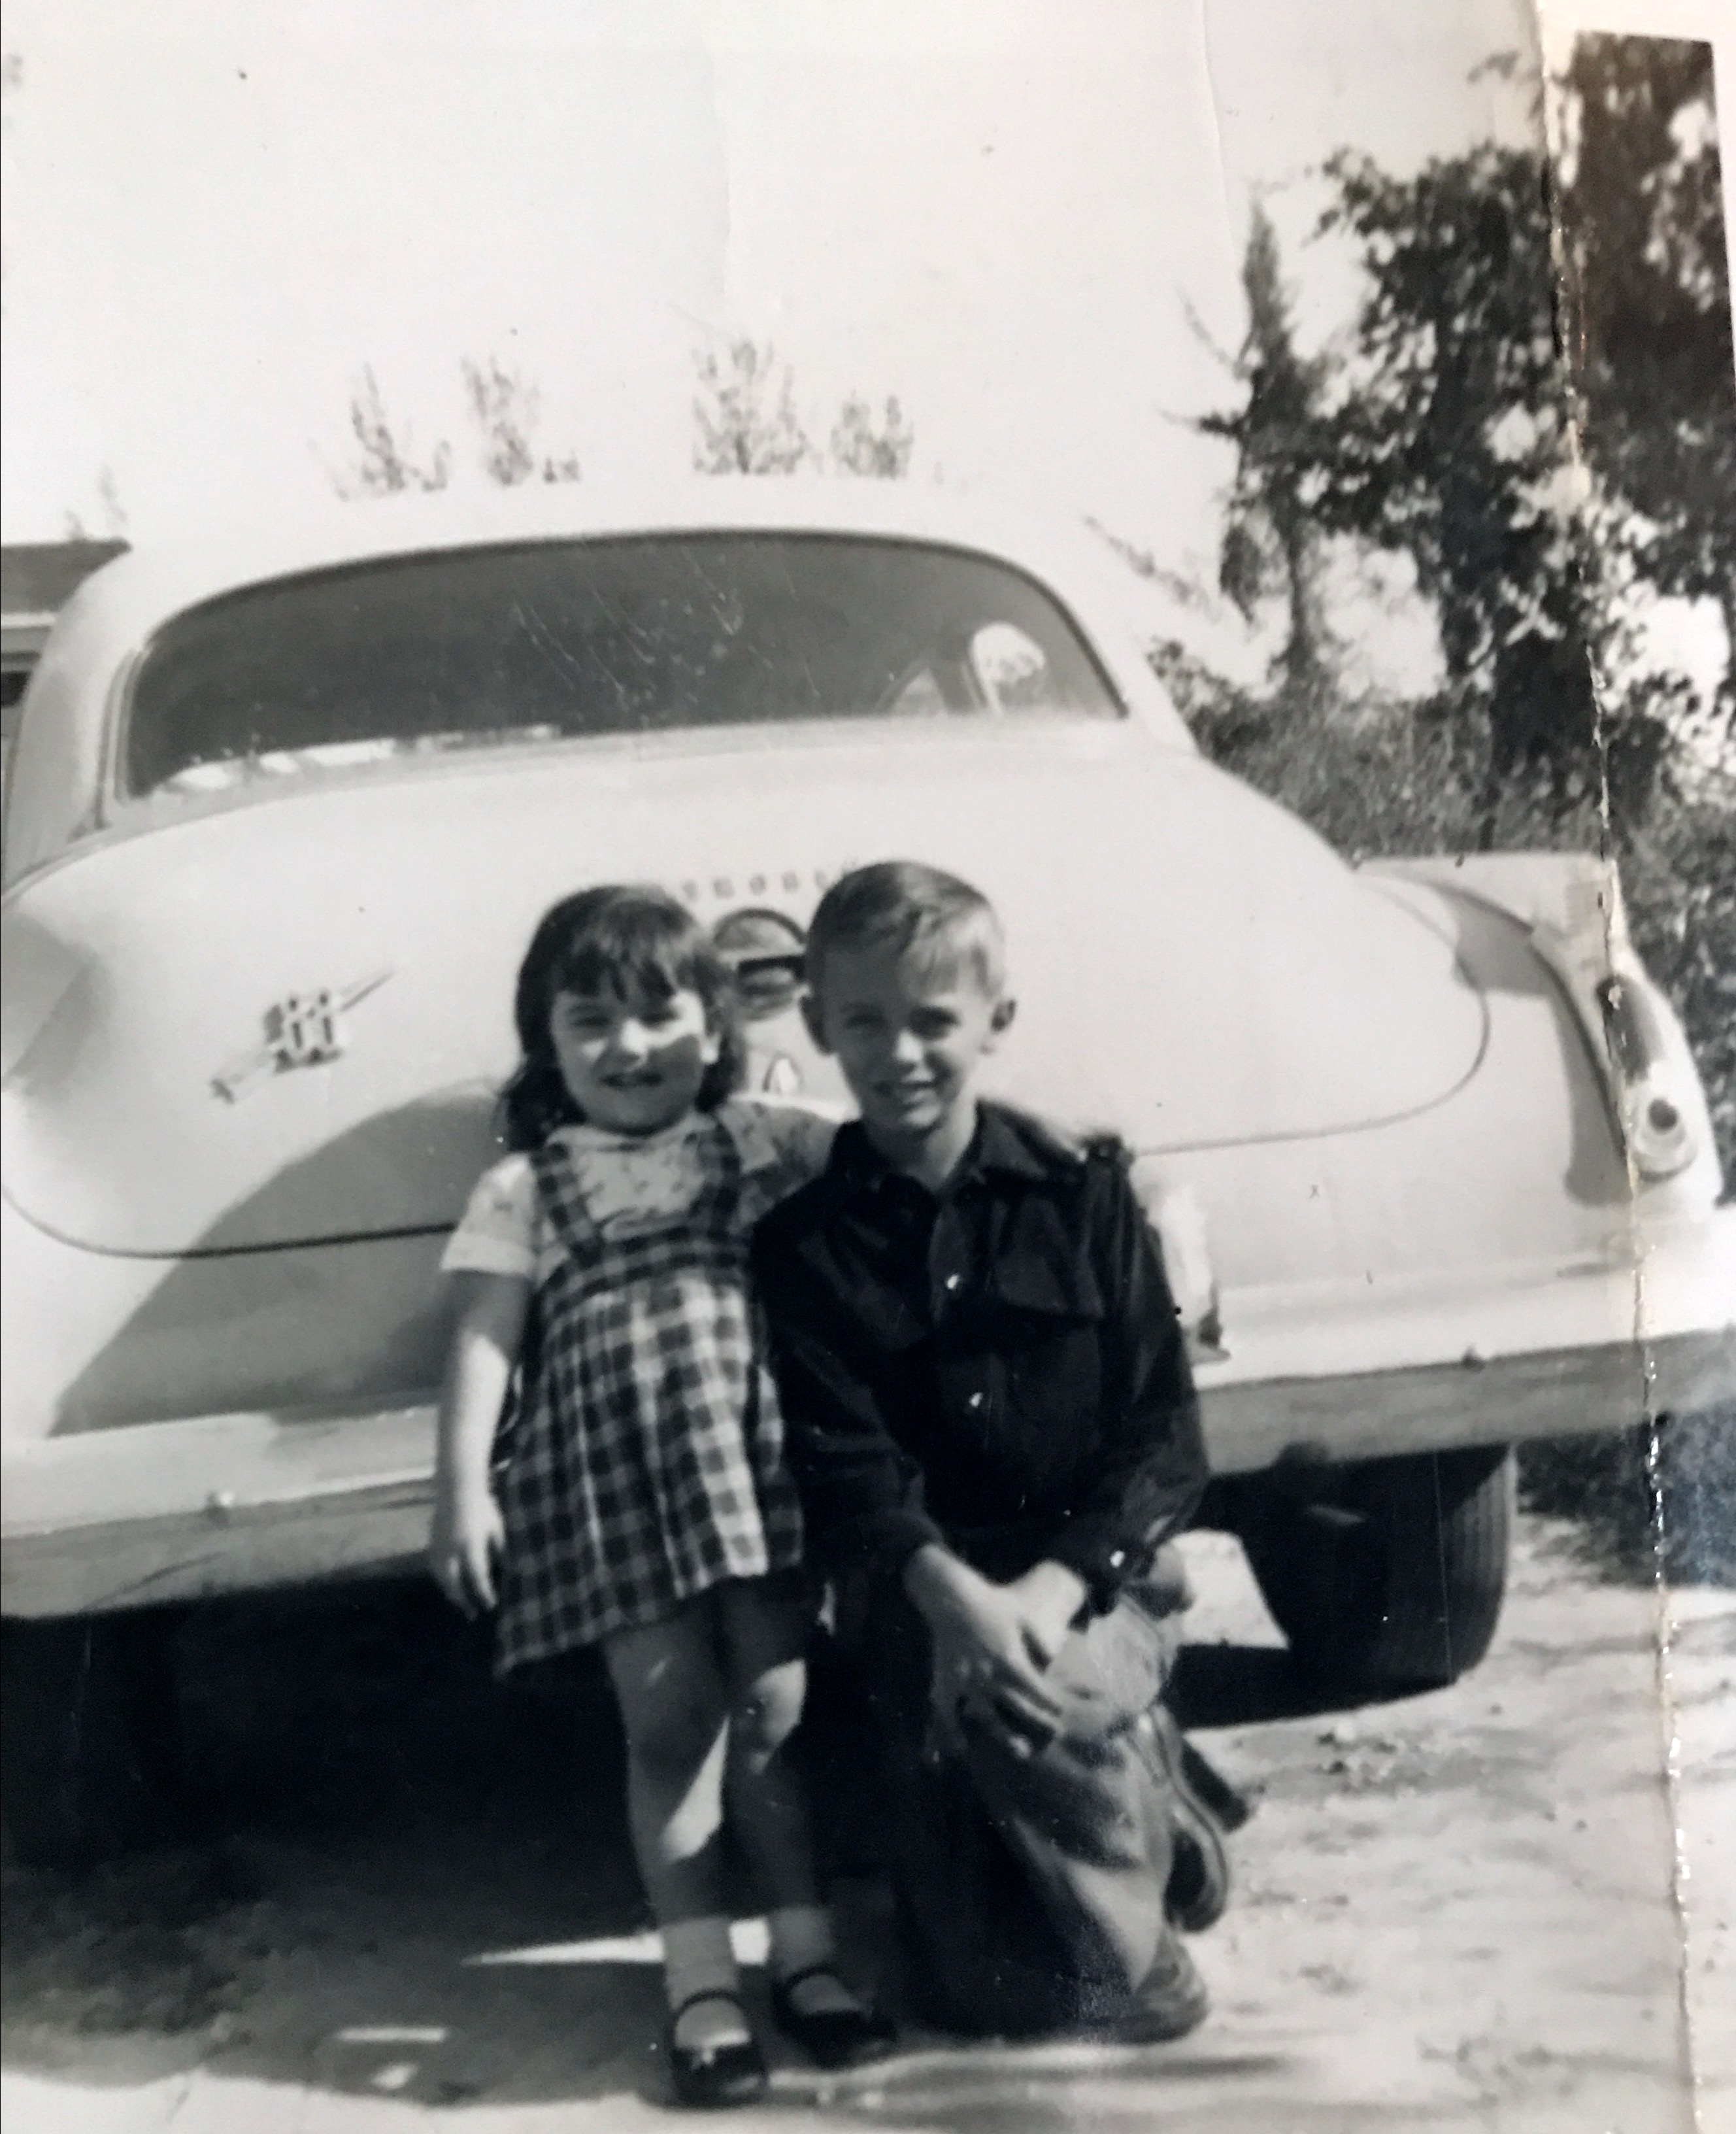 Big brother Rick and I, think 1953 or 54